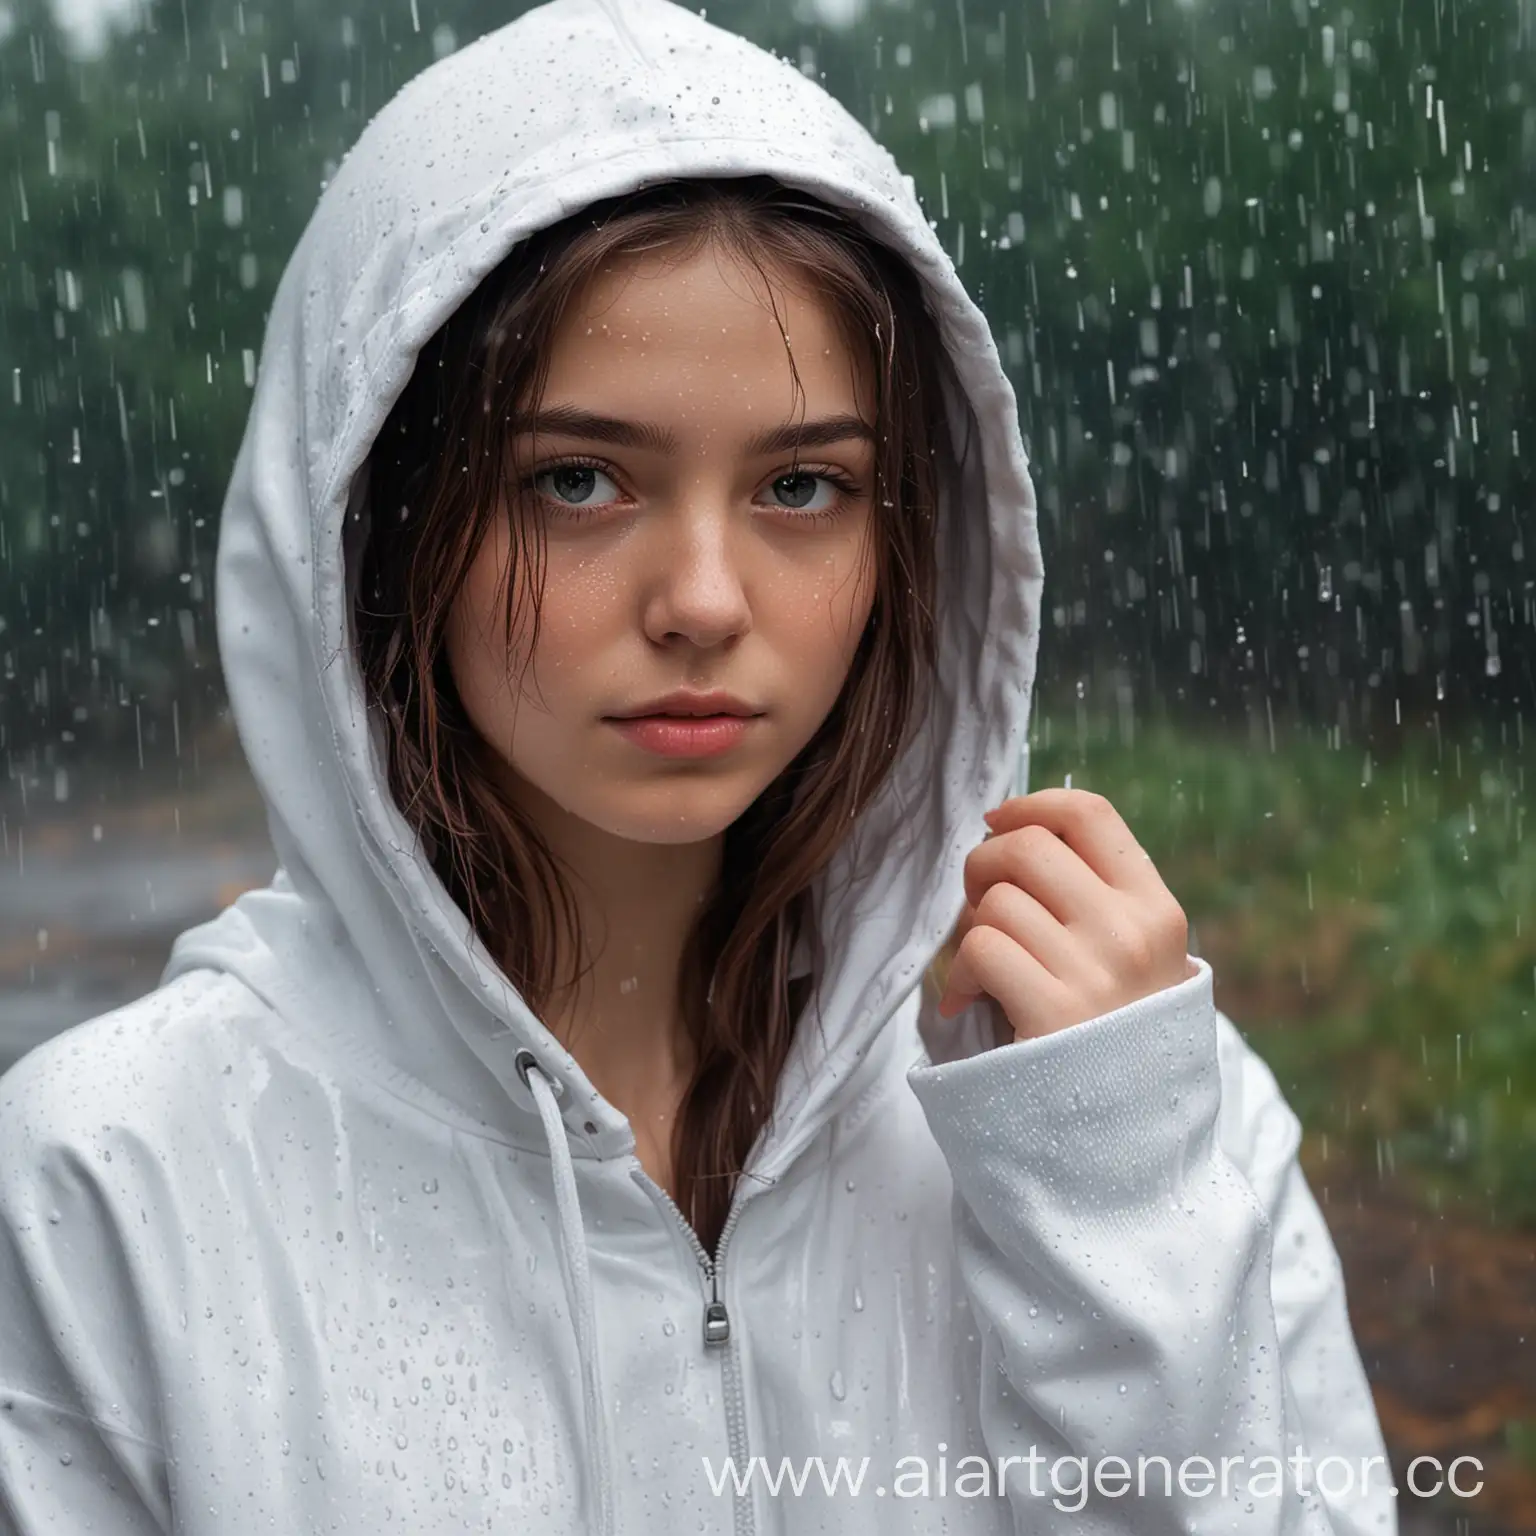 A girl in a white hoodie stands in the rain with a hood